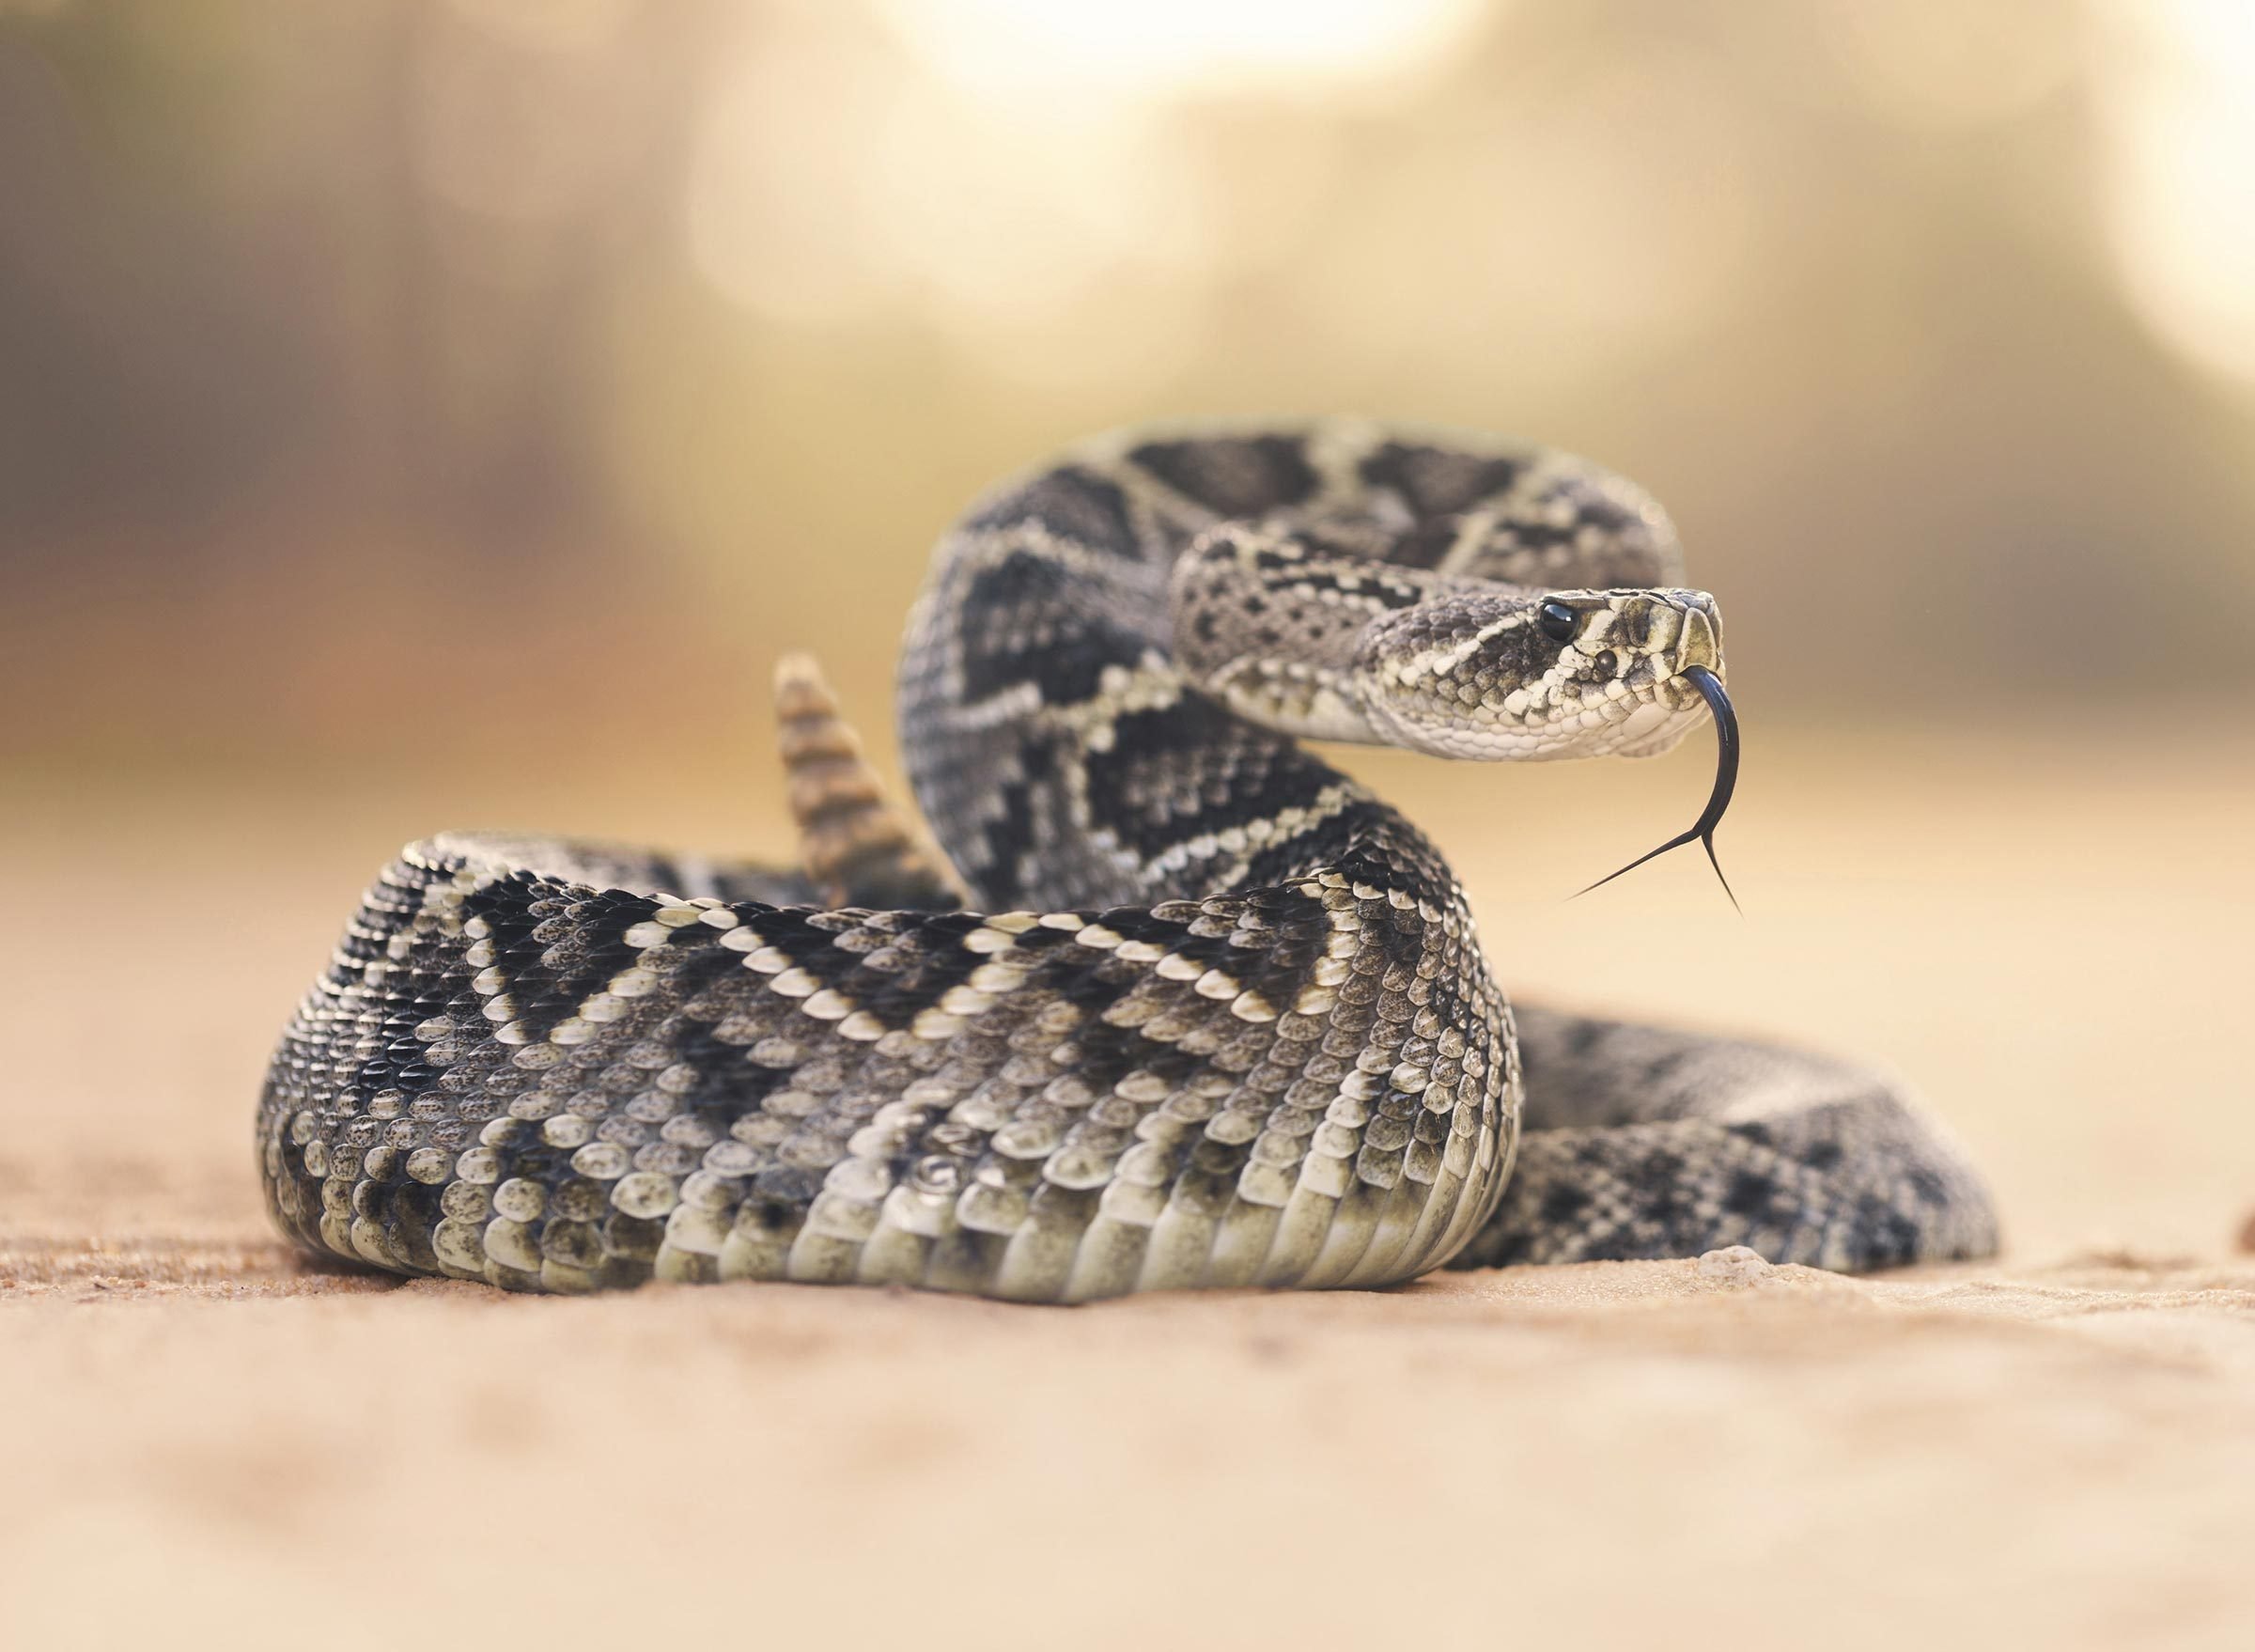 How I Survived a Rattlesnake Bite—With No Way of Calling 911 or Getting to a Hospital